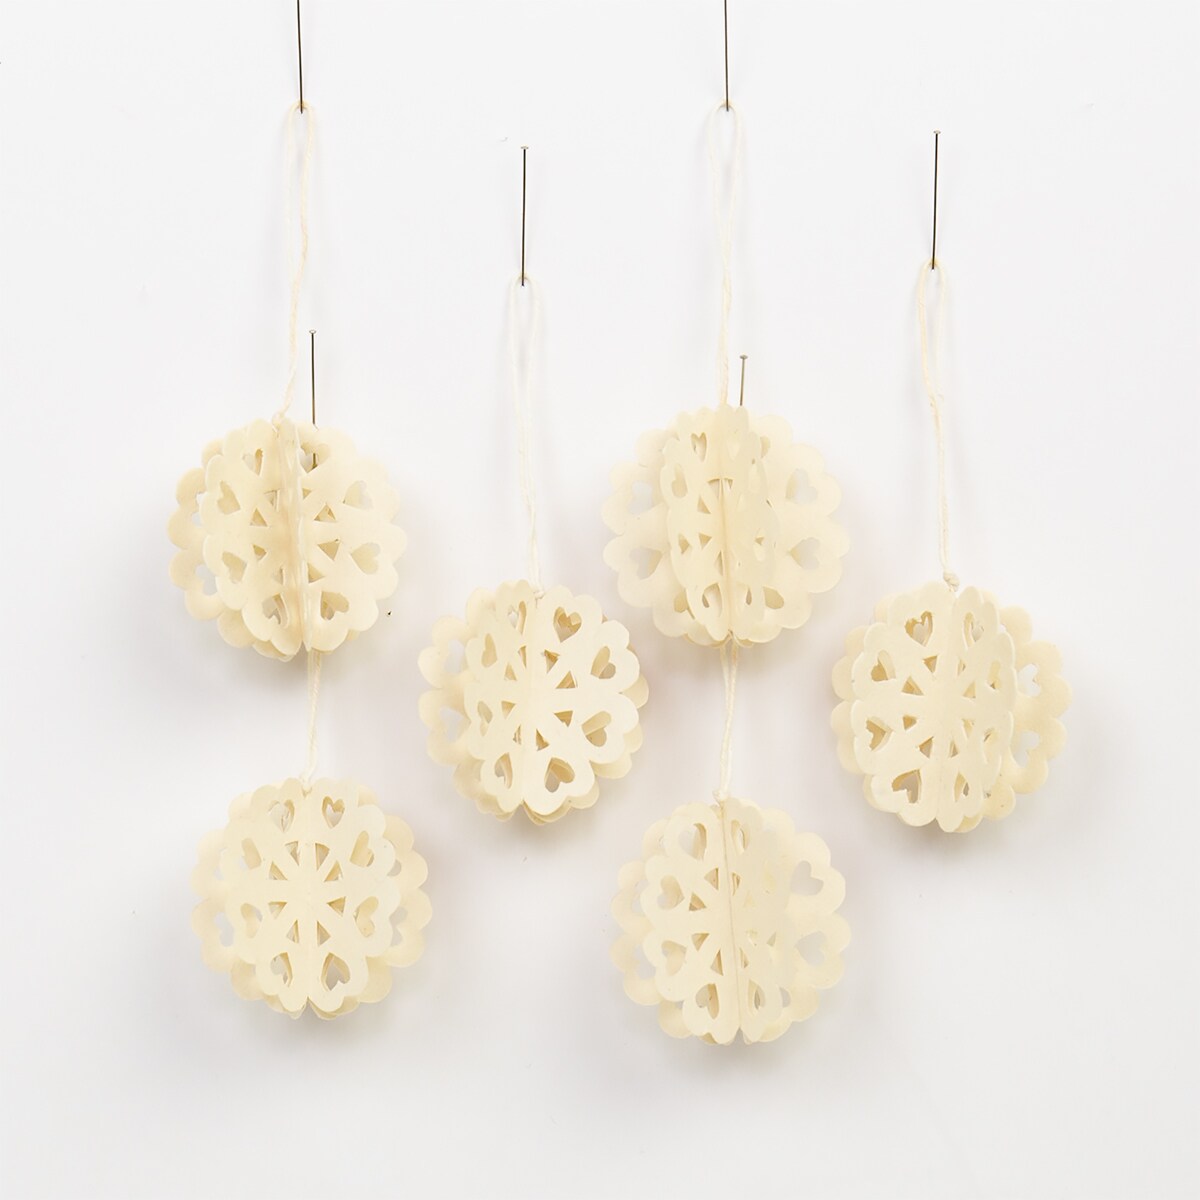 BISCUIT Christmas ornaments, 6-pack